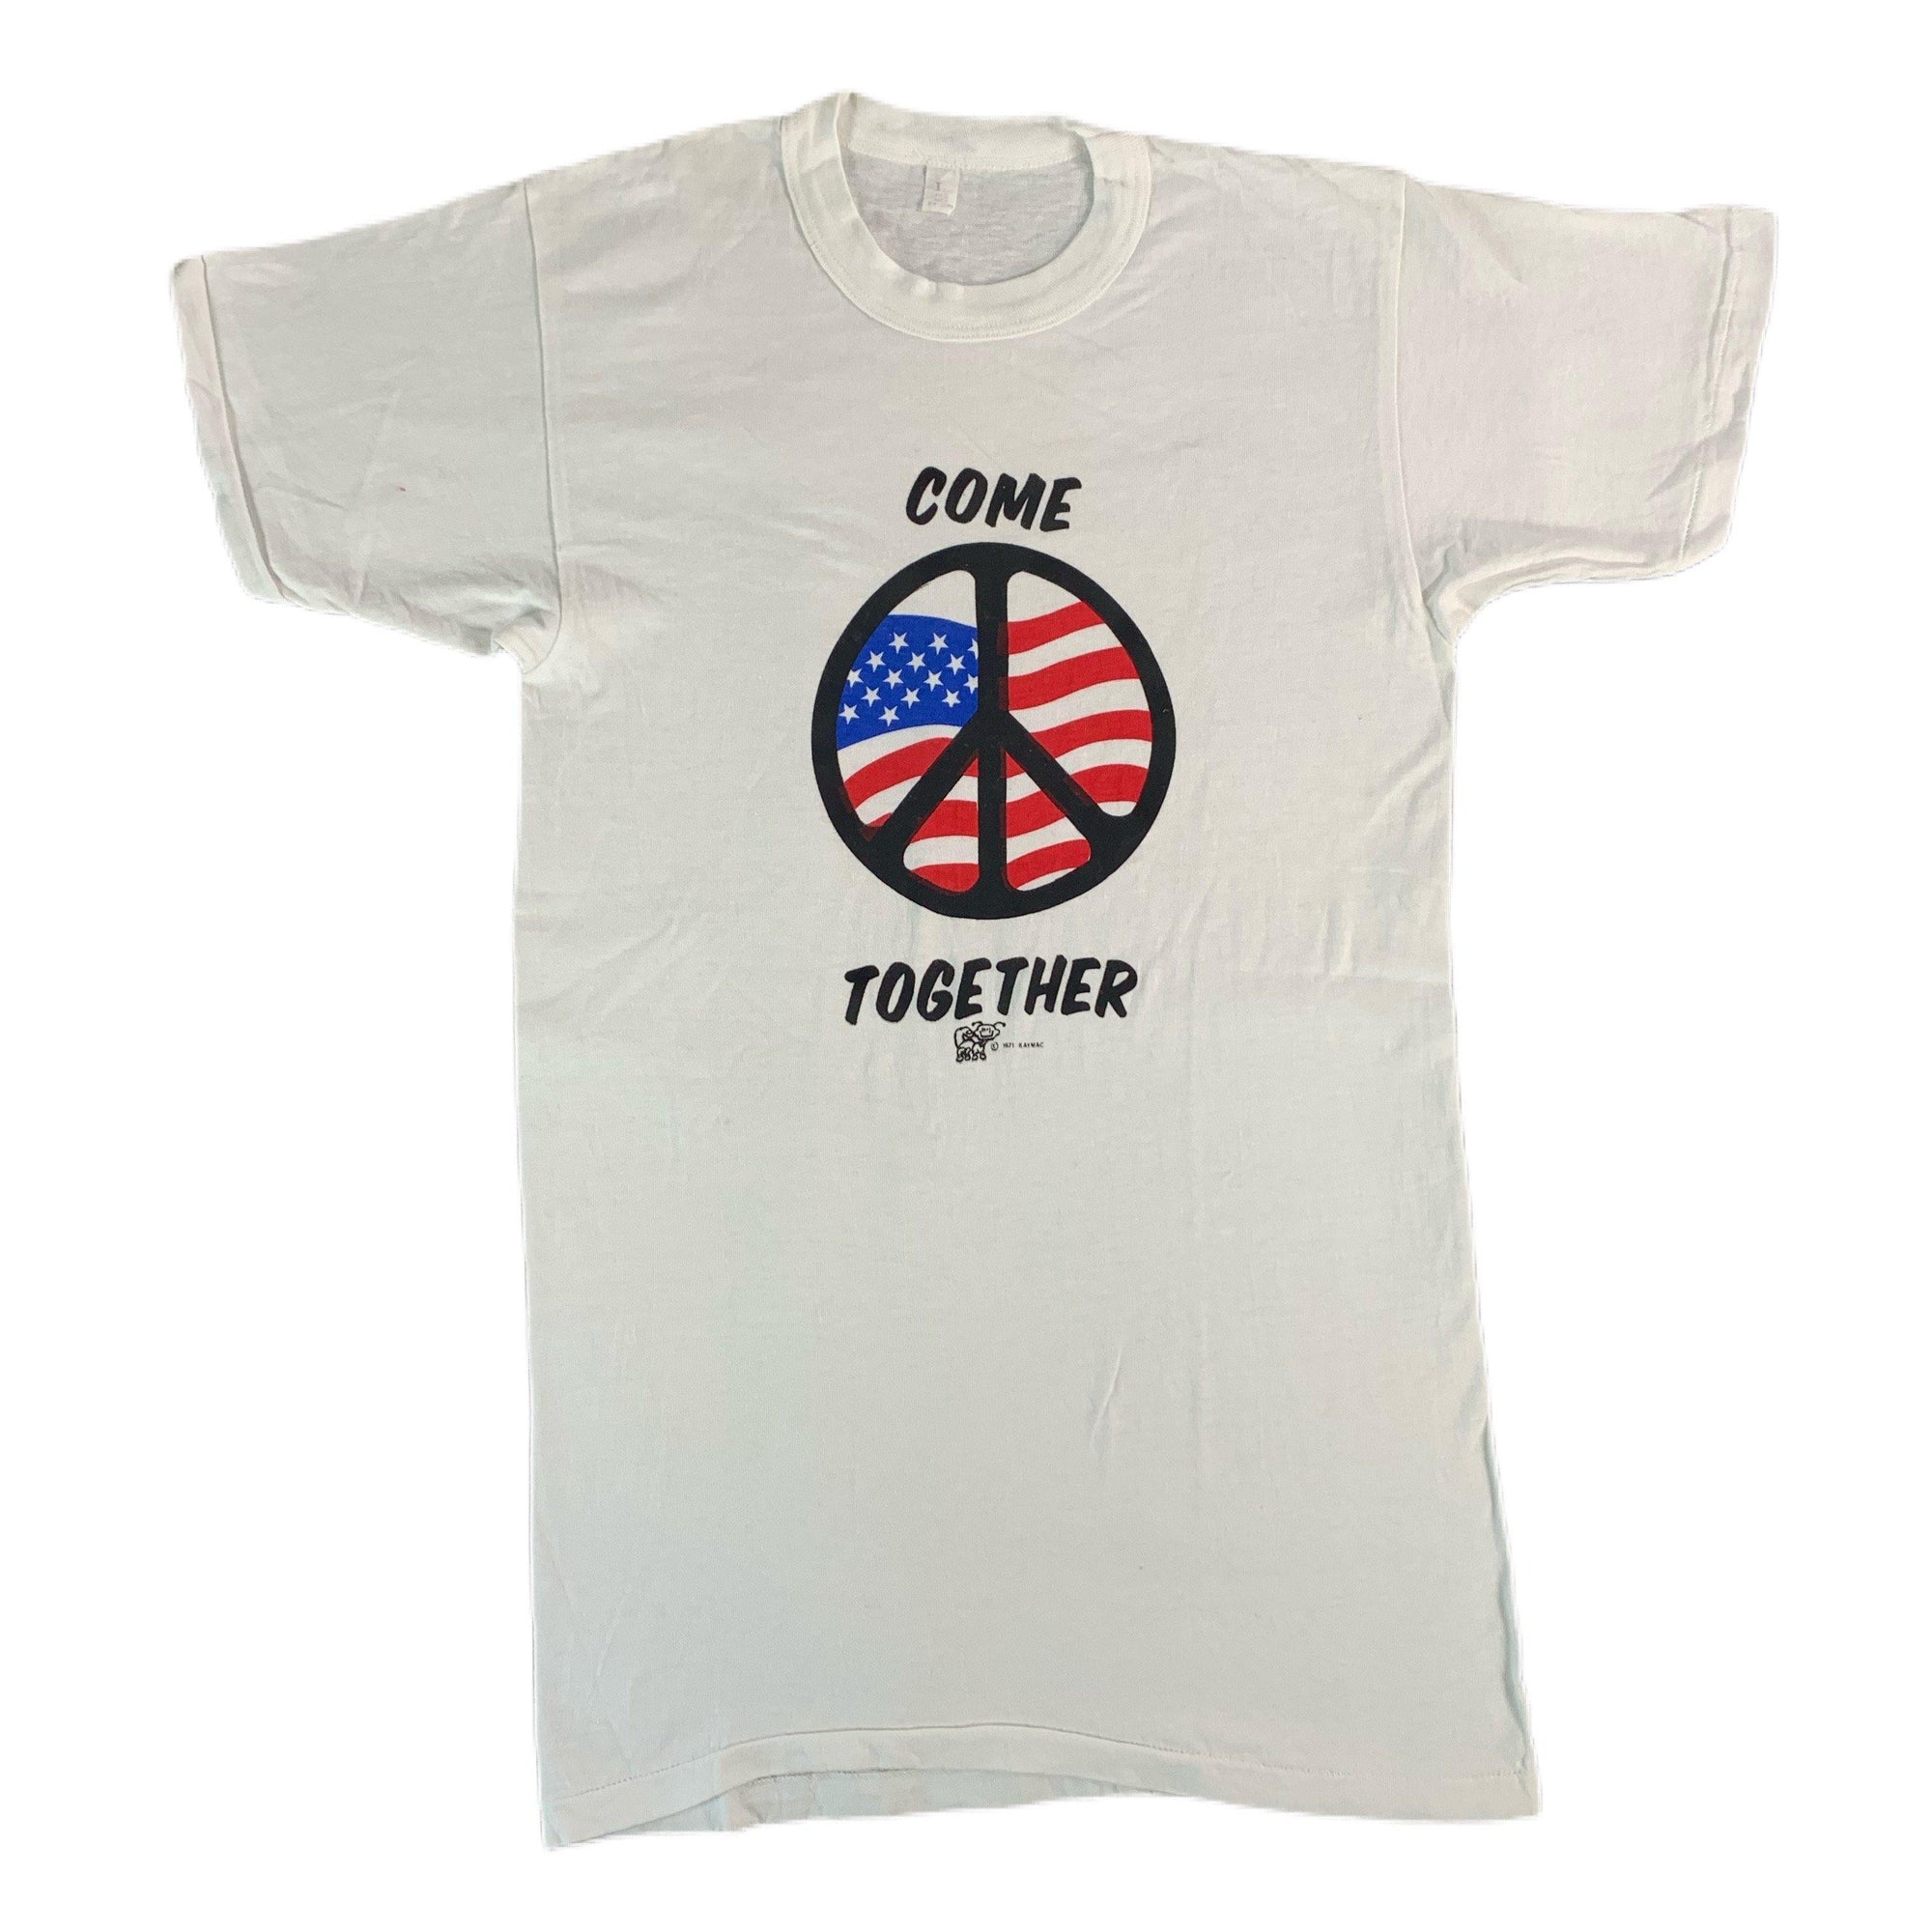 Vintage Hippie Come Together "1971" T-Shirt - jointcustodydc